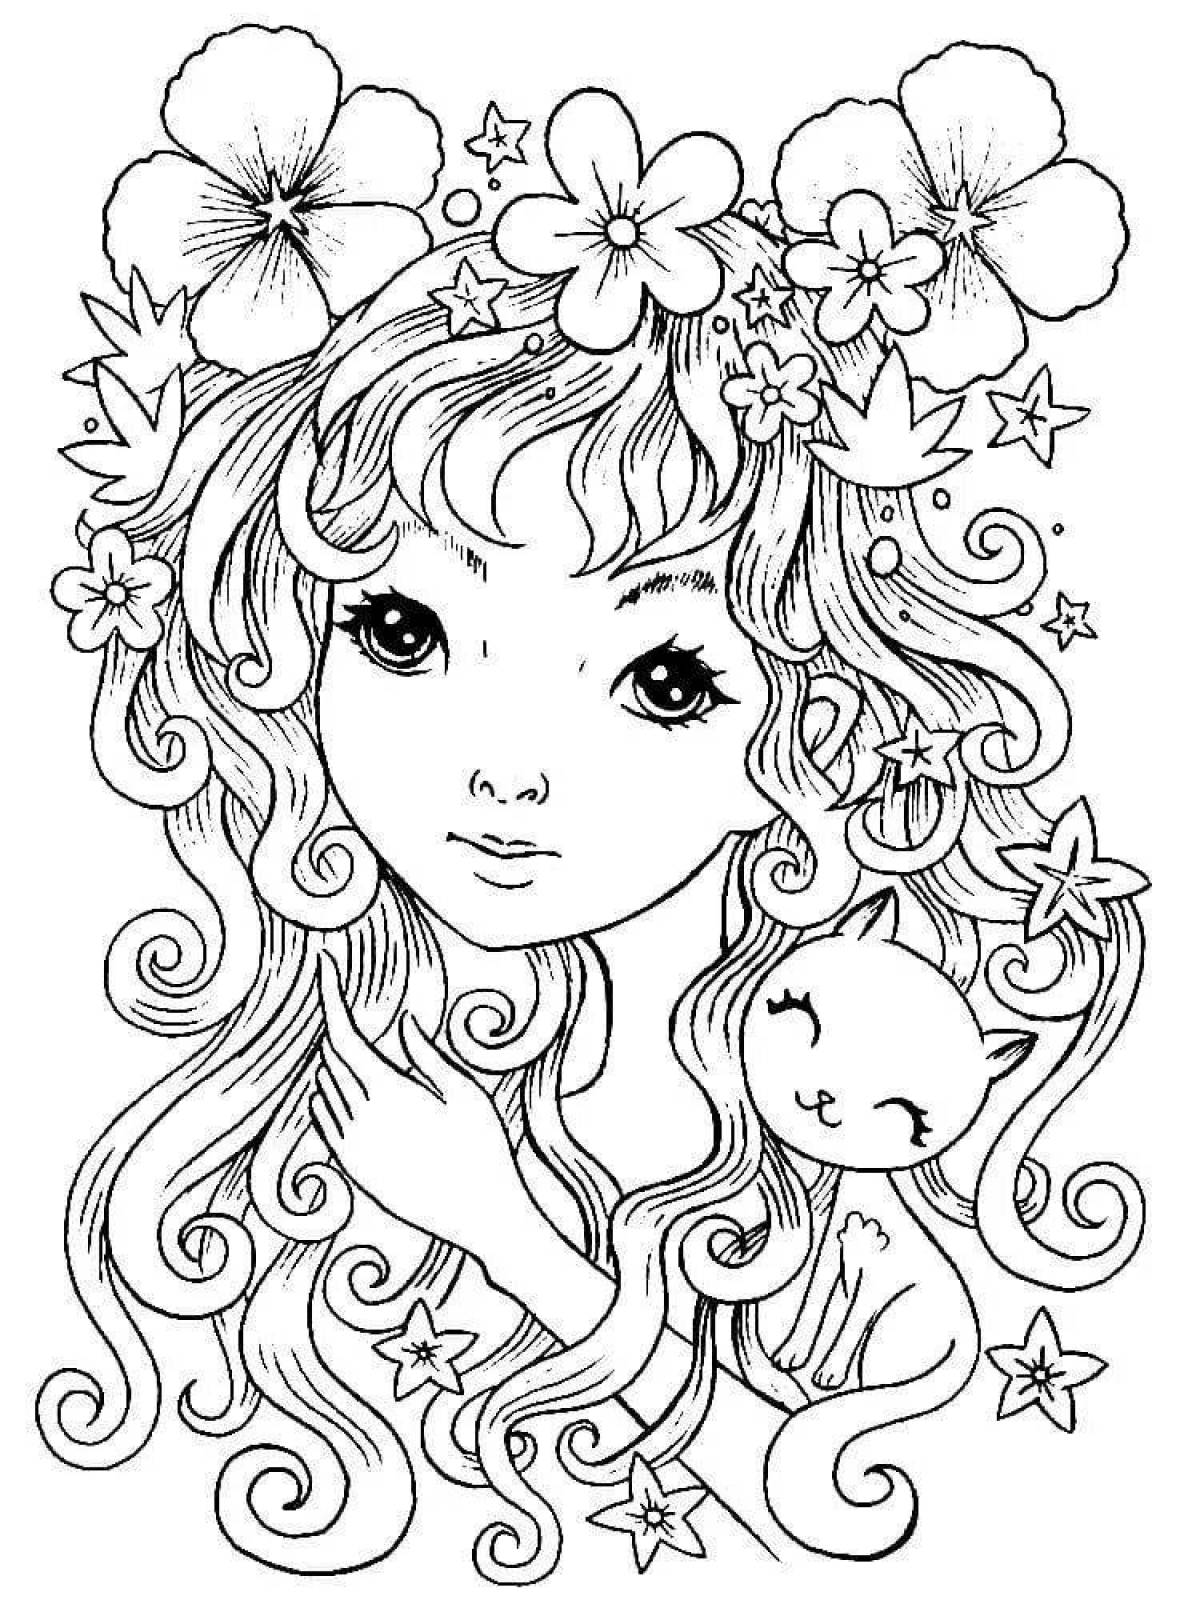 Glorious coloring book 8-9 years old for girls